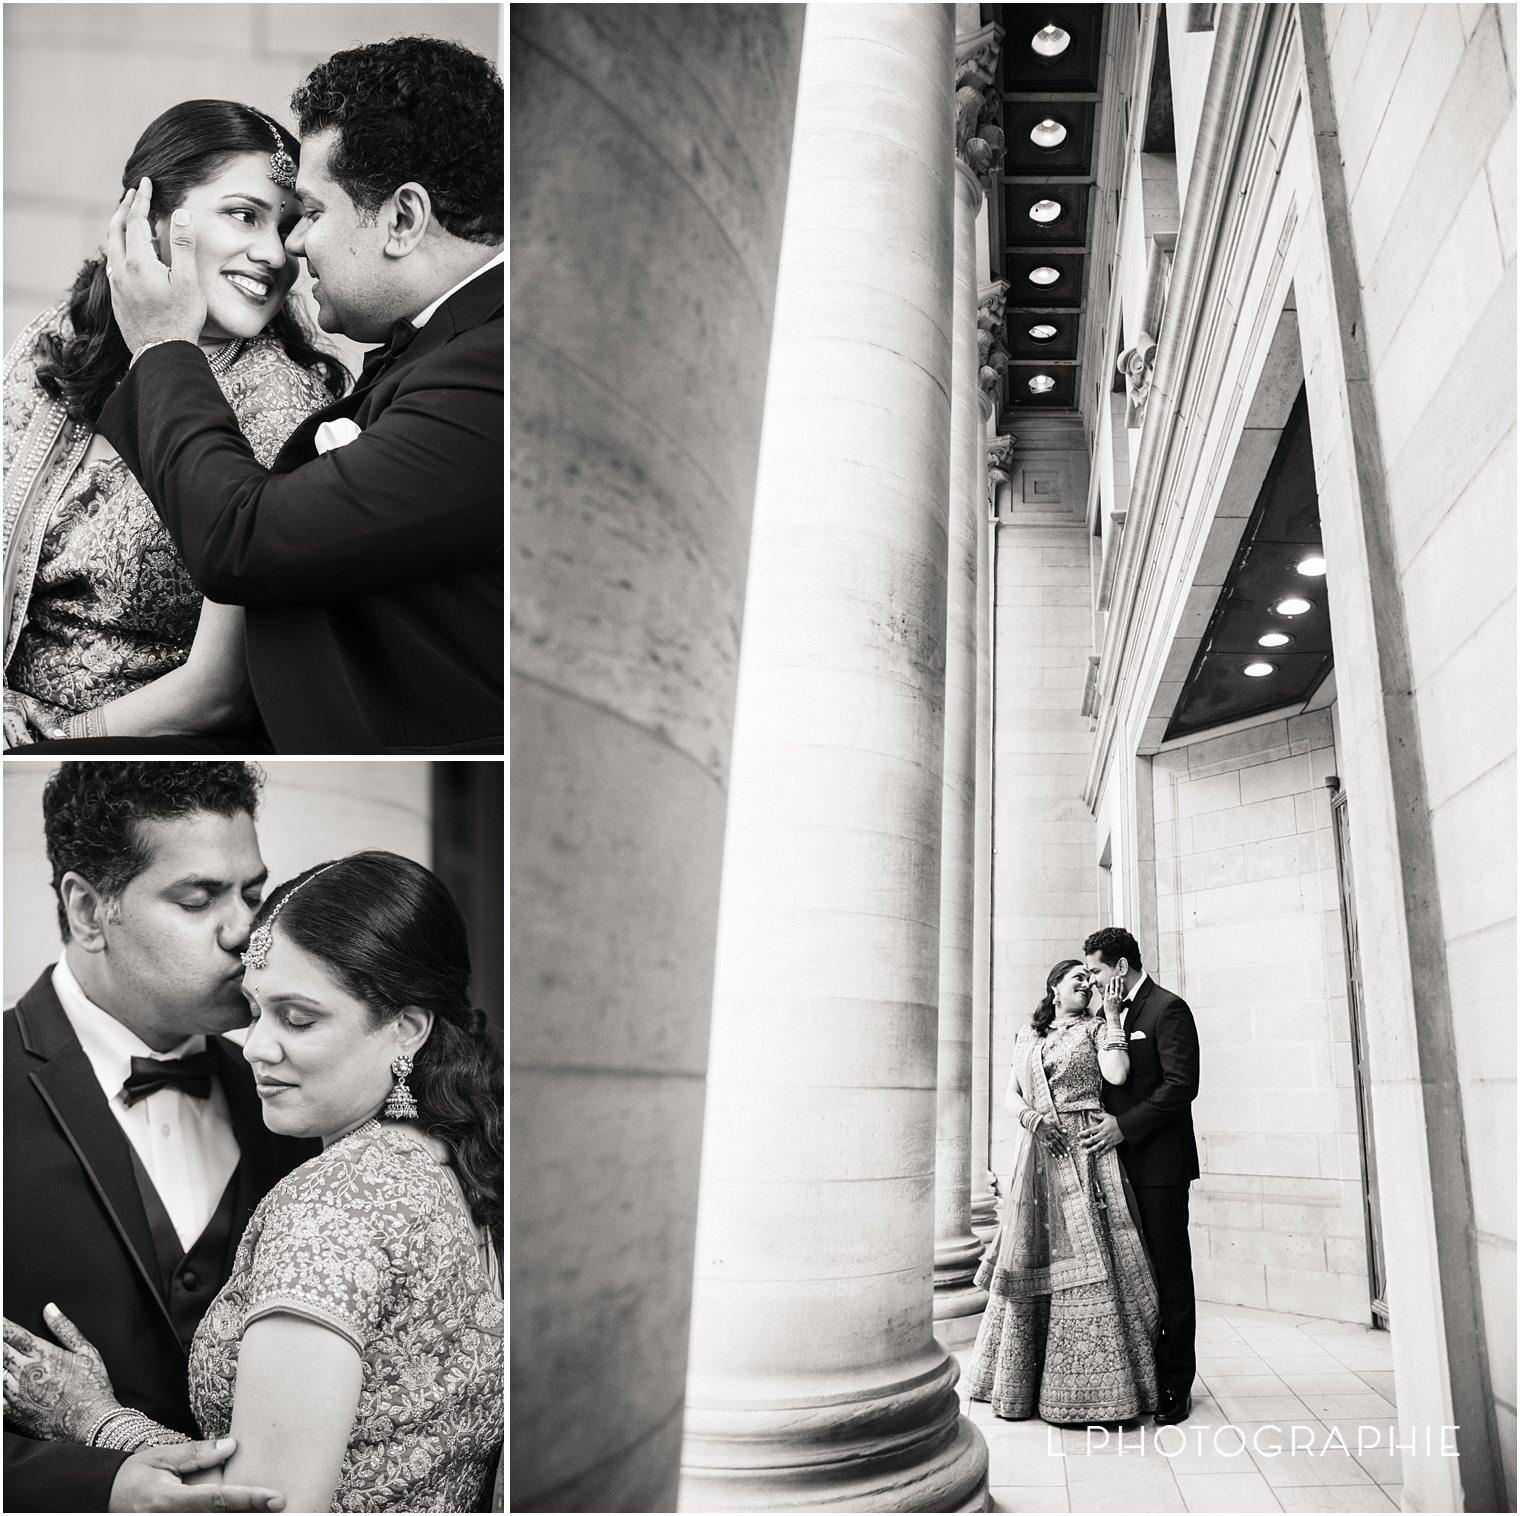 Crystal Ballroom,Indian wedding,Kate Hayes,L Photographie,L Photographie weddings,Marriott Grand Hotel,Meredith Marquardt,Old Post Office Plaza,St. Louis wedding,St. Louis wedding photography,Statler Ballroom,best St. Louis wedding photographer,downtown St. Louis,sangeet,wedding at the Marriott Grand,